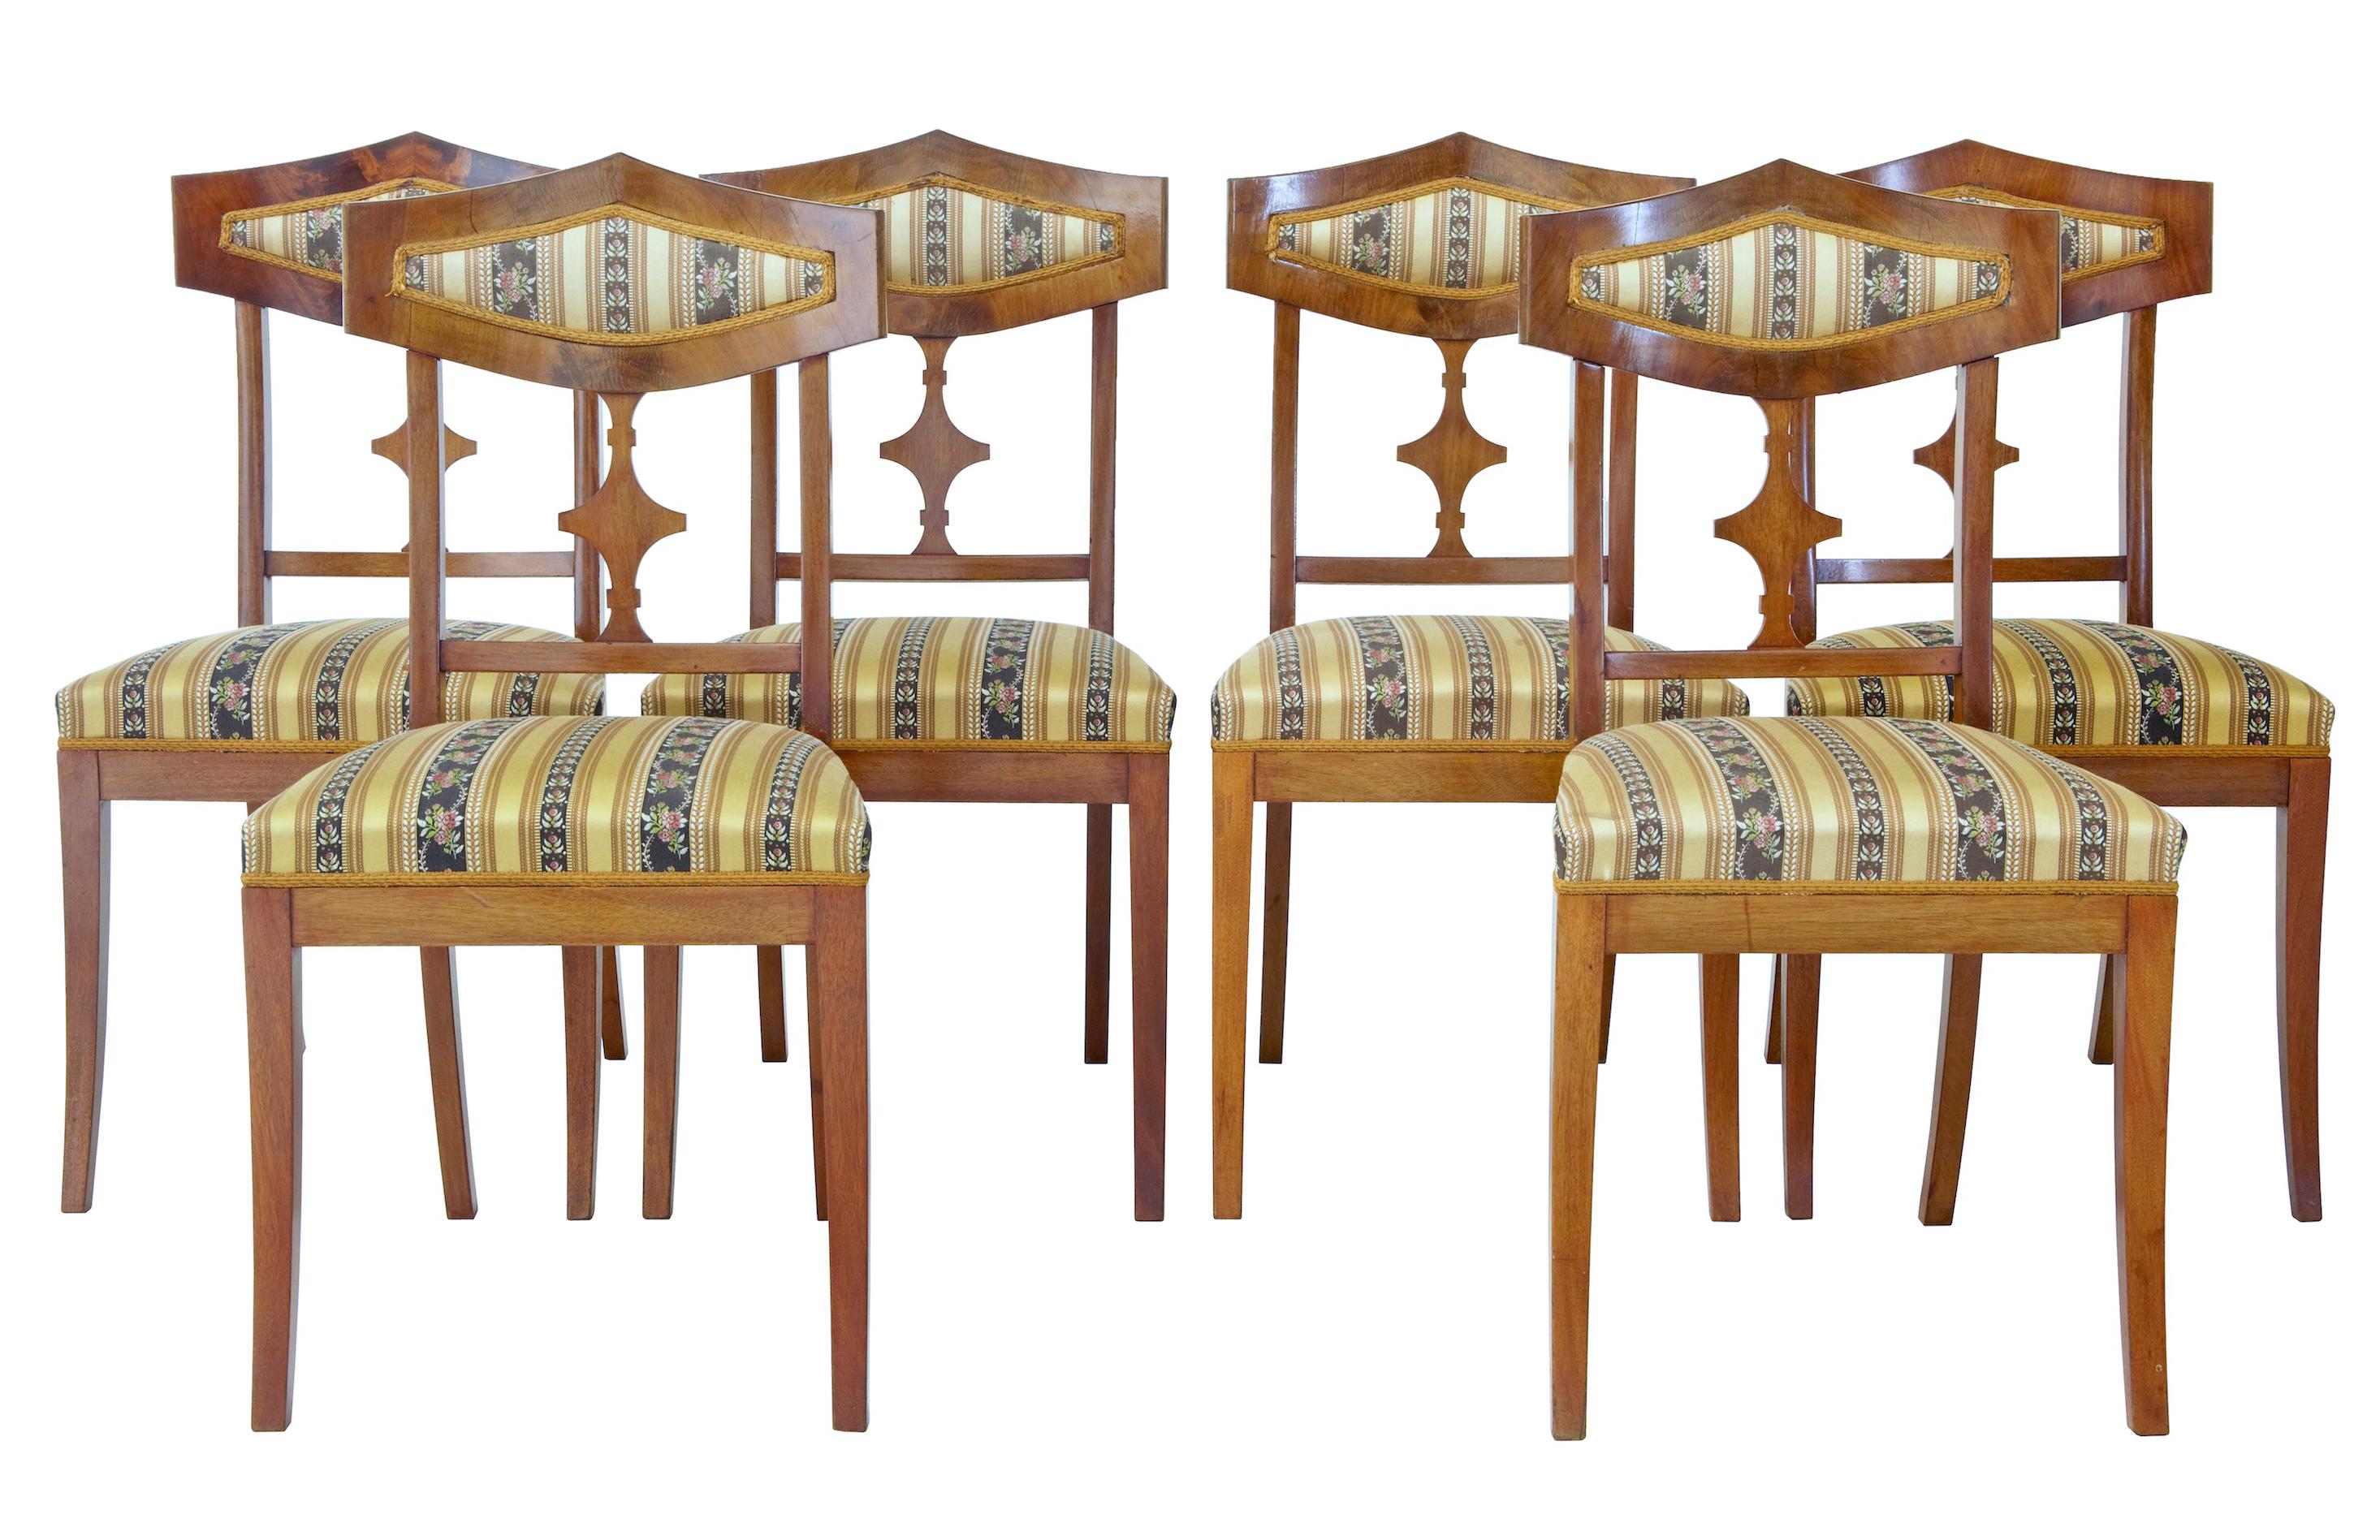 Large suite of furniture consisting of 1 sofa, 4 armchairs, 6 single chairs and 2 stools circa 1910. All upholstered in matching fabrics. Flame mahogany veneers.

Obvious signs of use with surface marks to legs.

Measures: Stool height: